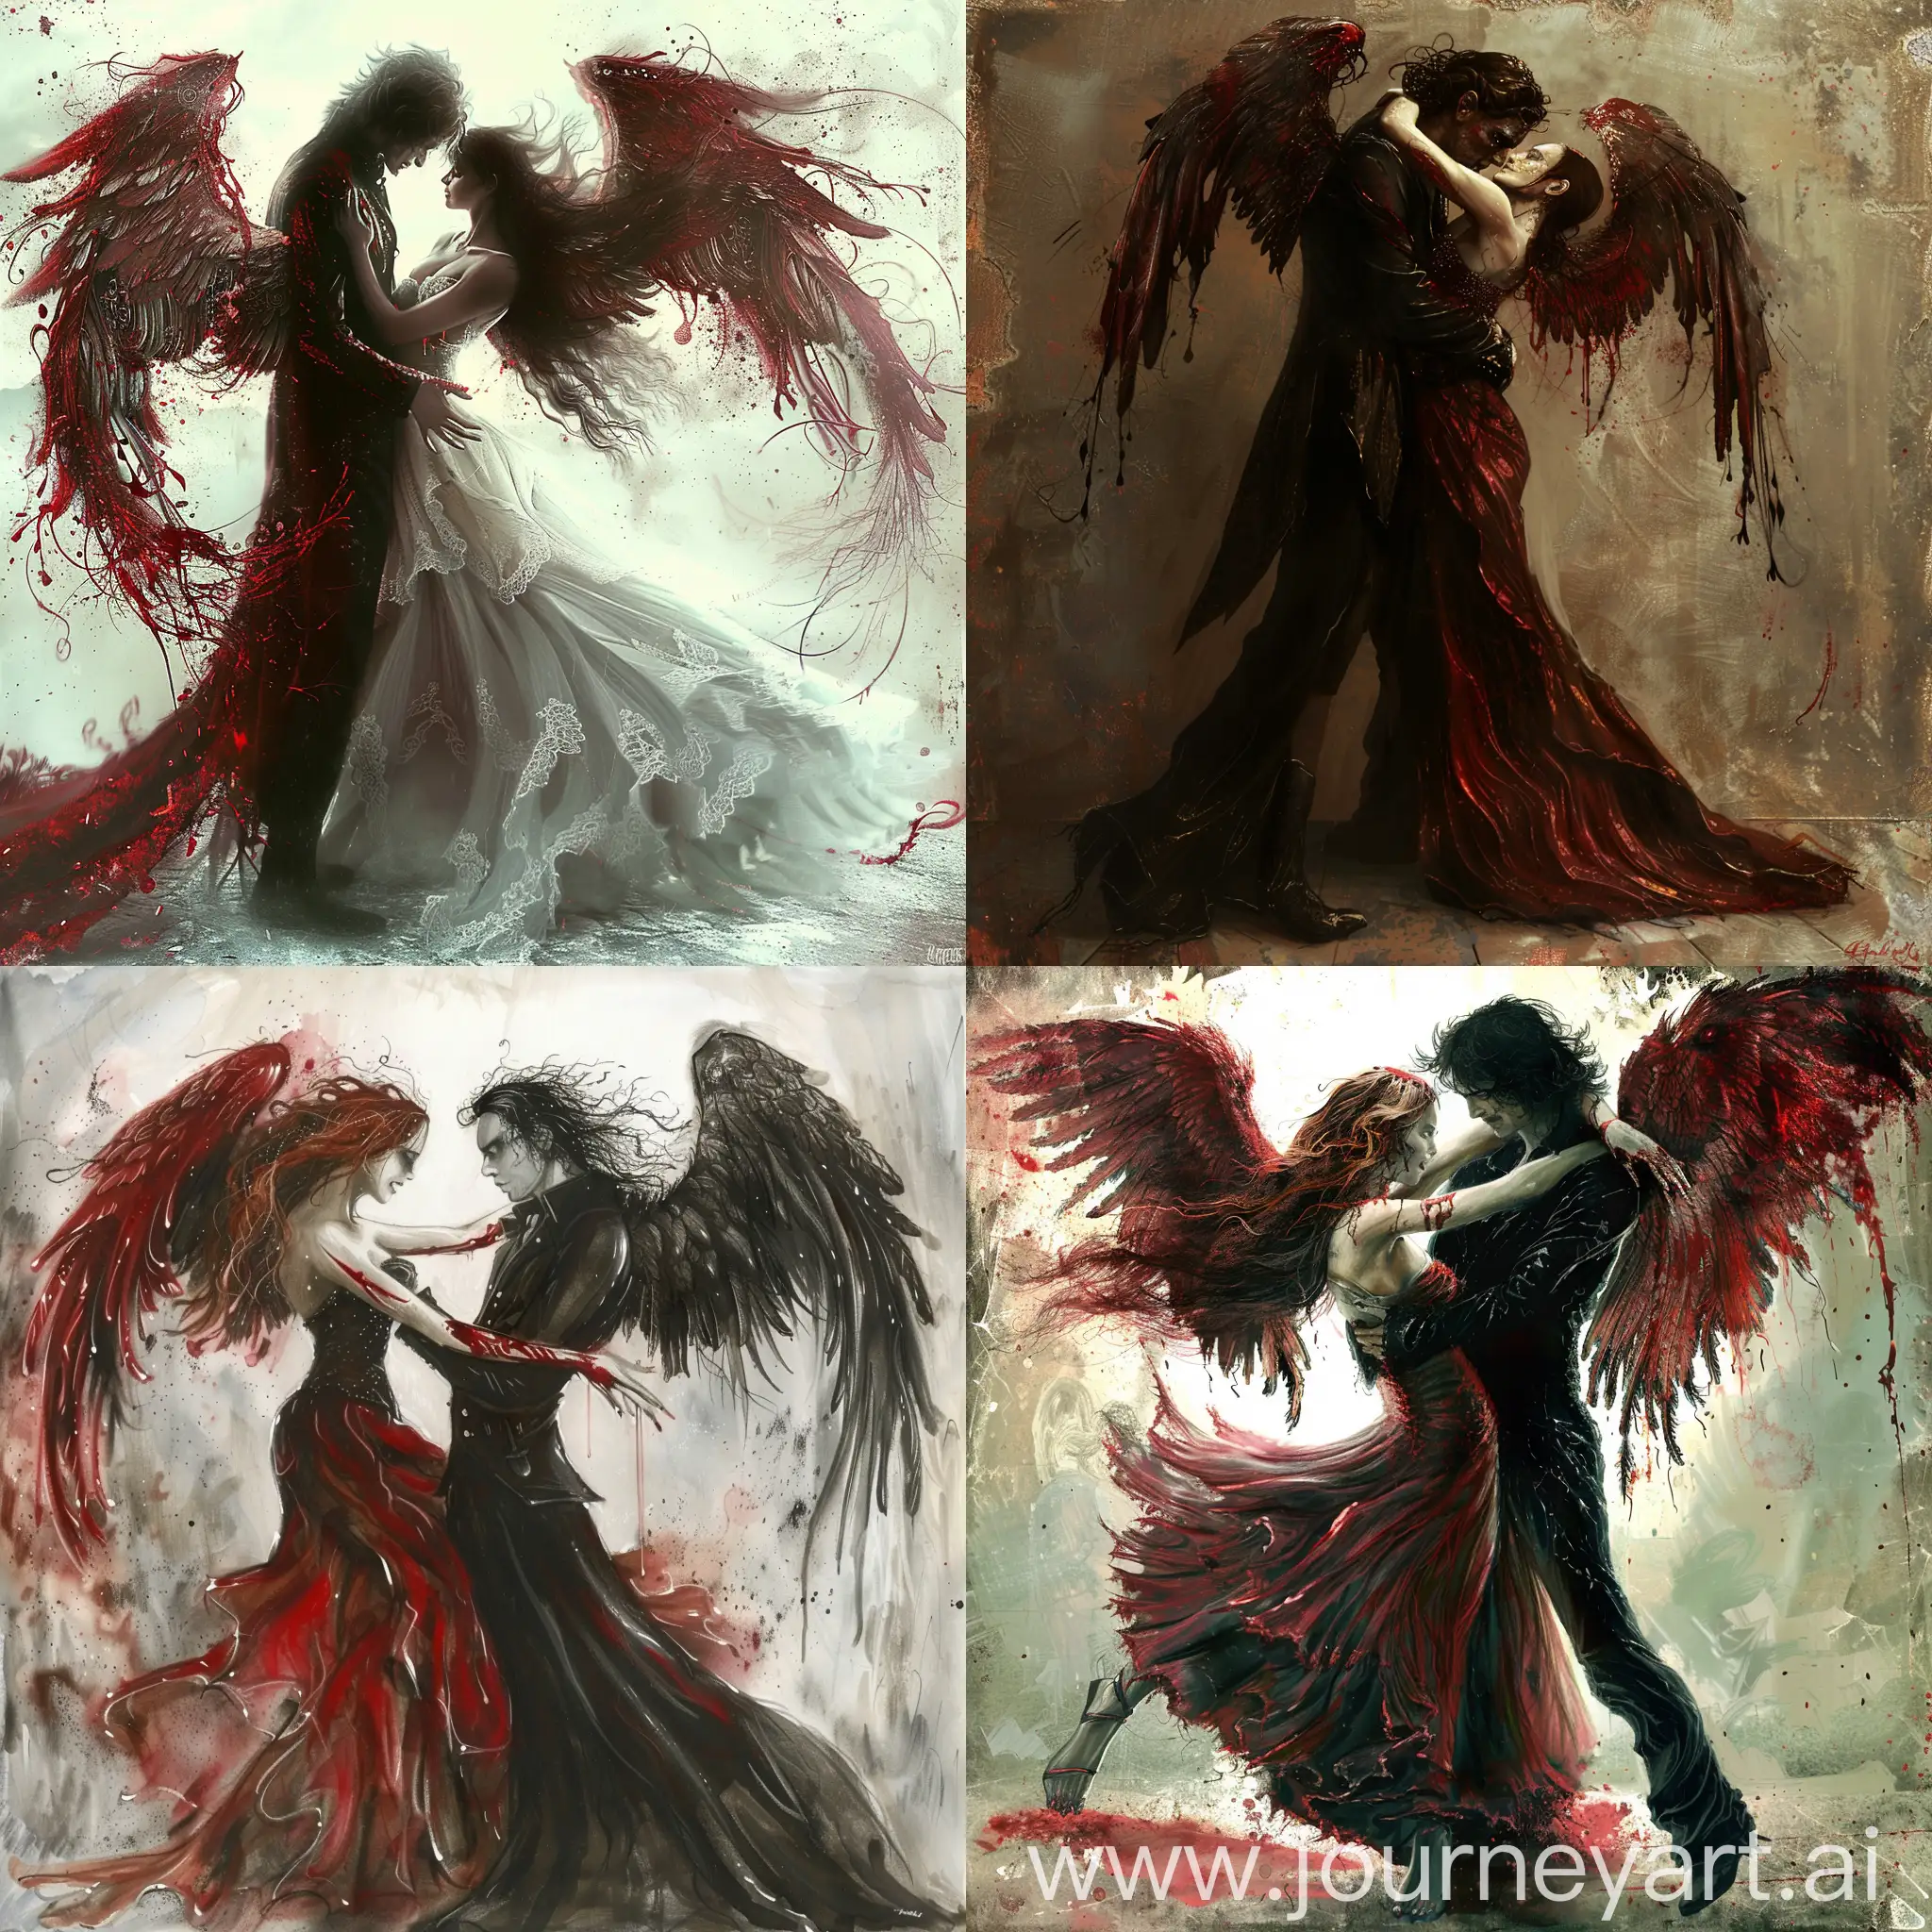 Ethereal-Dance-of-an-Angel-with-Bloody-Wings-Amidst-Laughter-and-Death